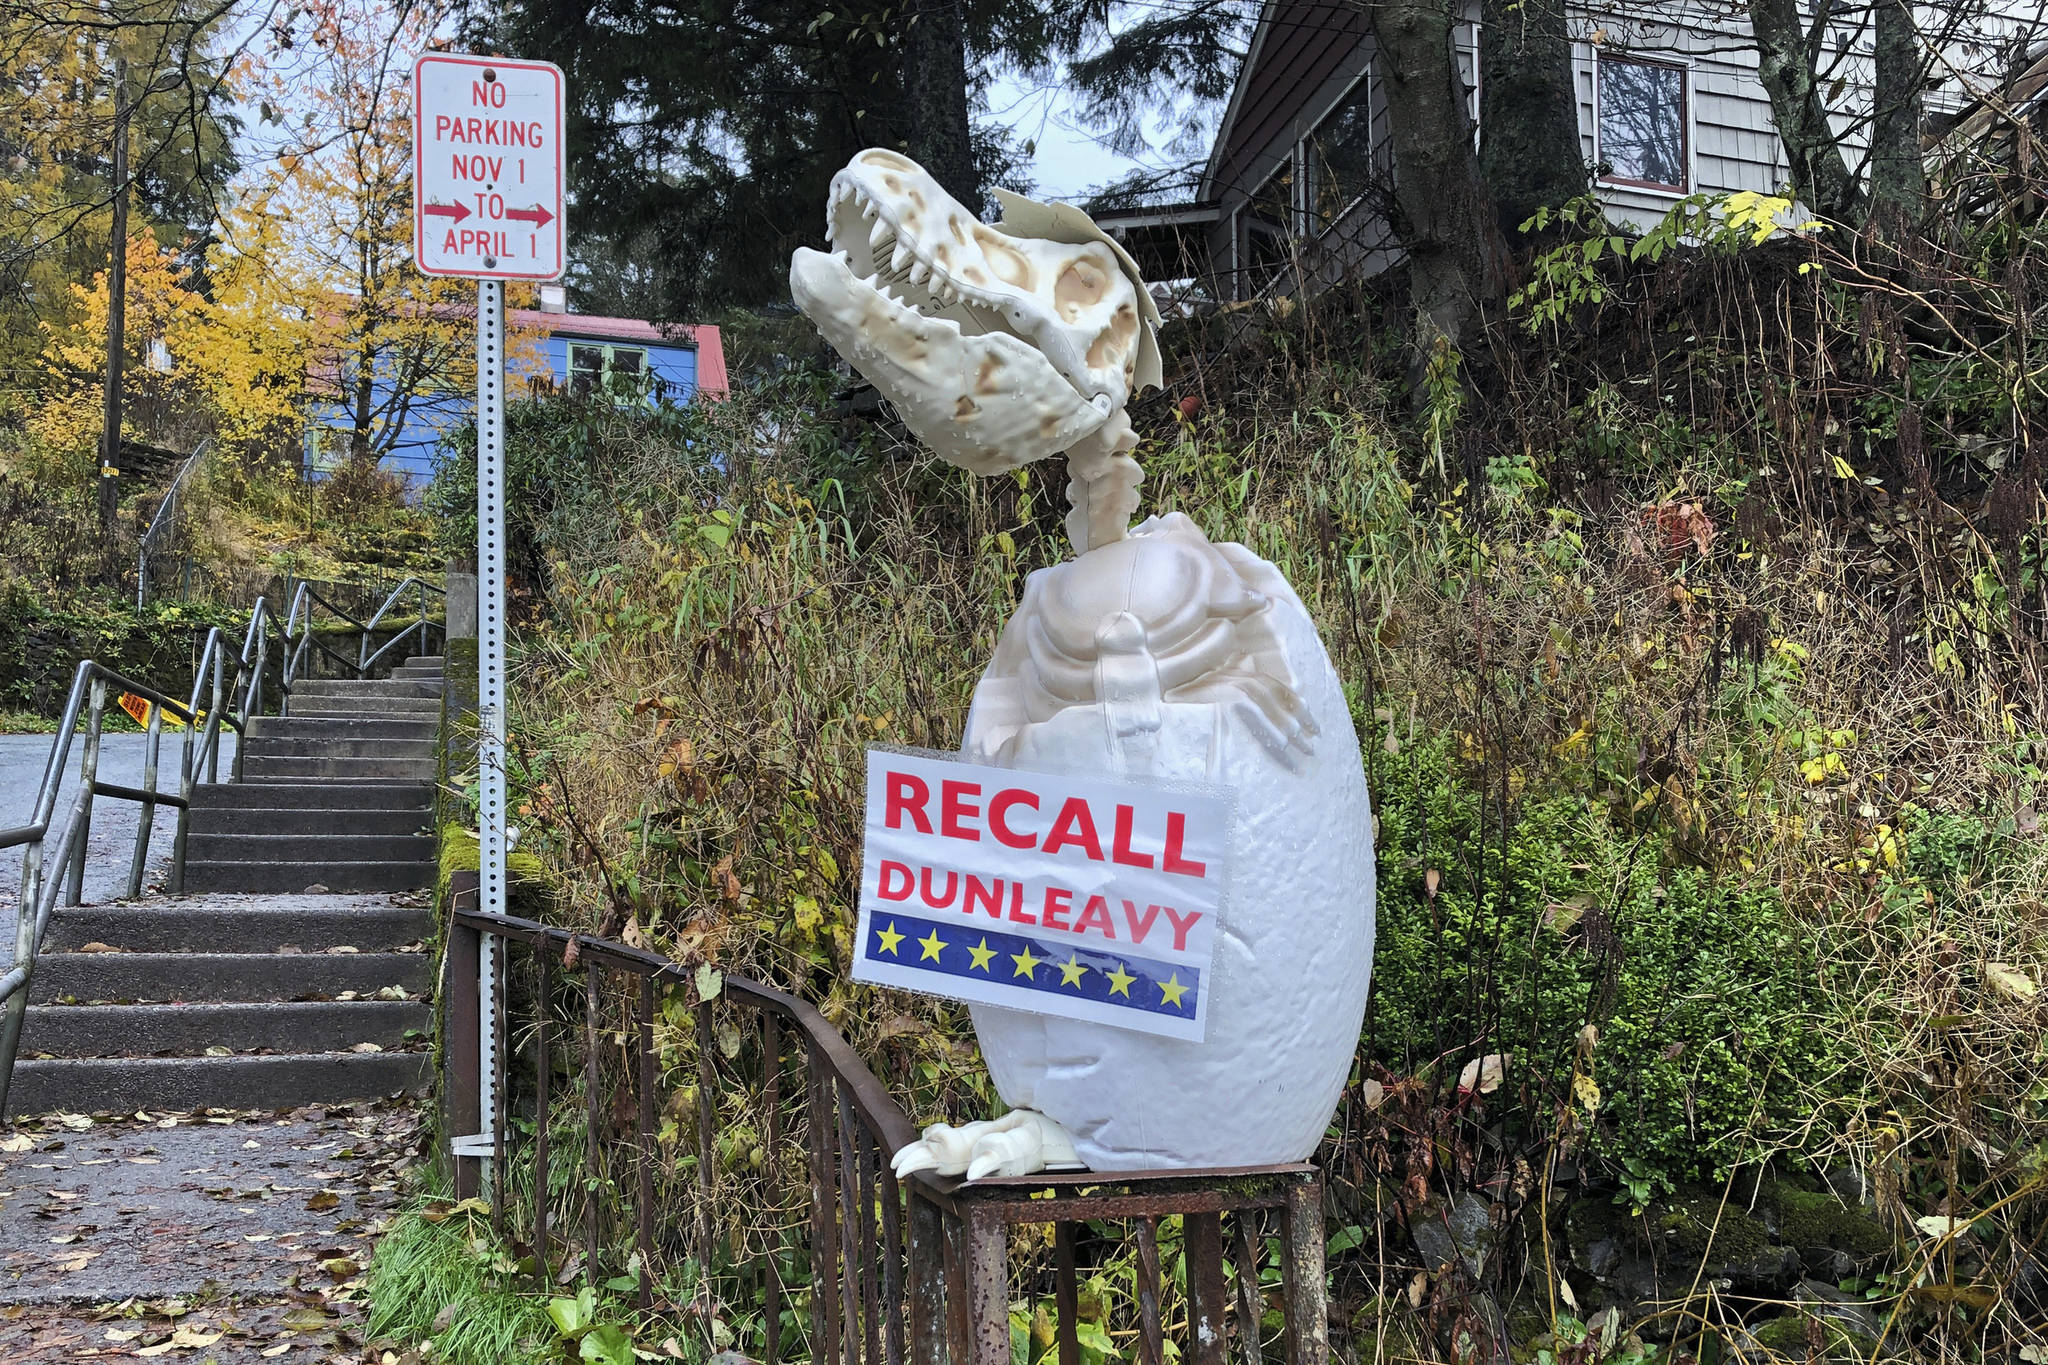 In this Friday, Nov. 1 photo, a sign reading “Recall Dunleavy” hangs from a decoration in front of a yard near the Alaska governor’s mansion in Juneau. A fight is brewing in the state over whether Republican Gov. Mike Dunleavy should be recalled from office, with his critics saying he’s incompetent and has recklessly tried to cut spending while supporters see a politically motivated attempt to undo the last election. (AP Photo | Becky Bohrer)